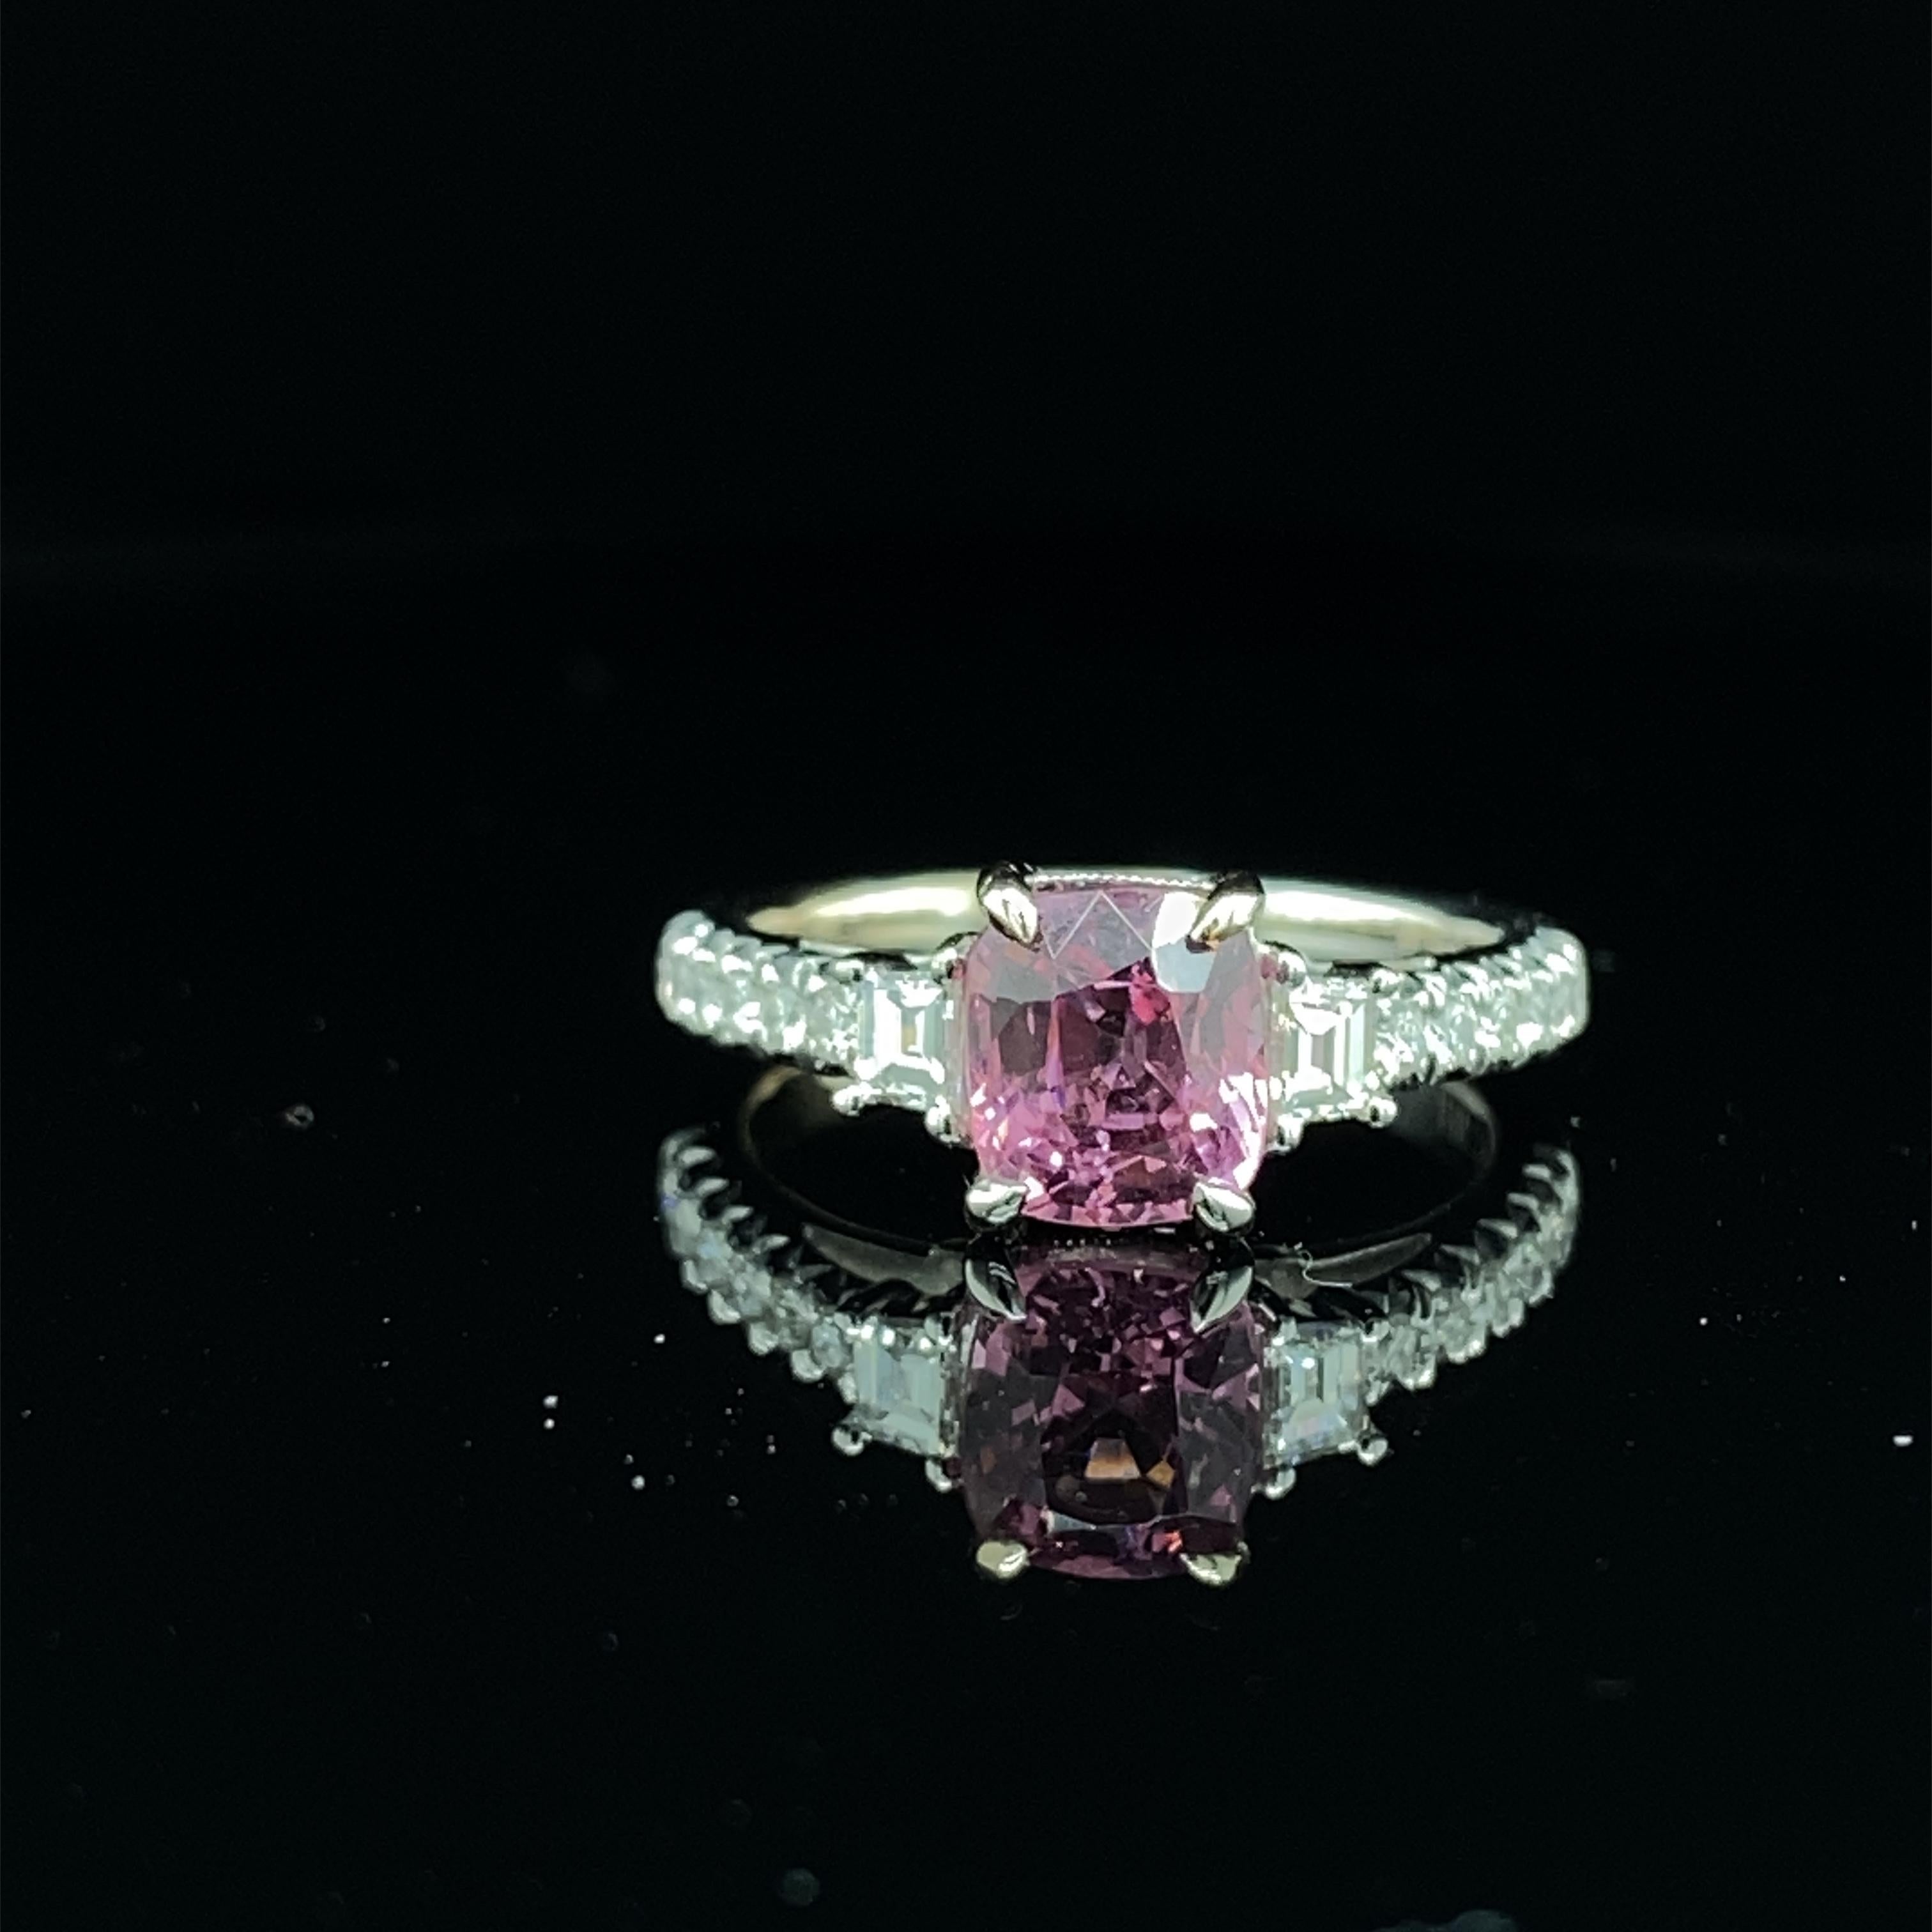 1.54 Carat GRS Certified Burma No Heat Pink Spinel and White Diamond Gold Ring:

A cute ring, it features a GRS certified natural cushion-cut Burmese unheated pink spinel weighing 1.54 carat, flanked by a pair of white trapezoid-cut diamonds as well